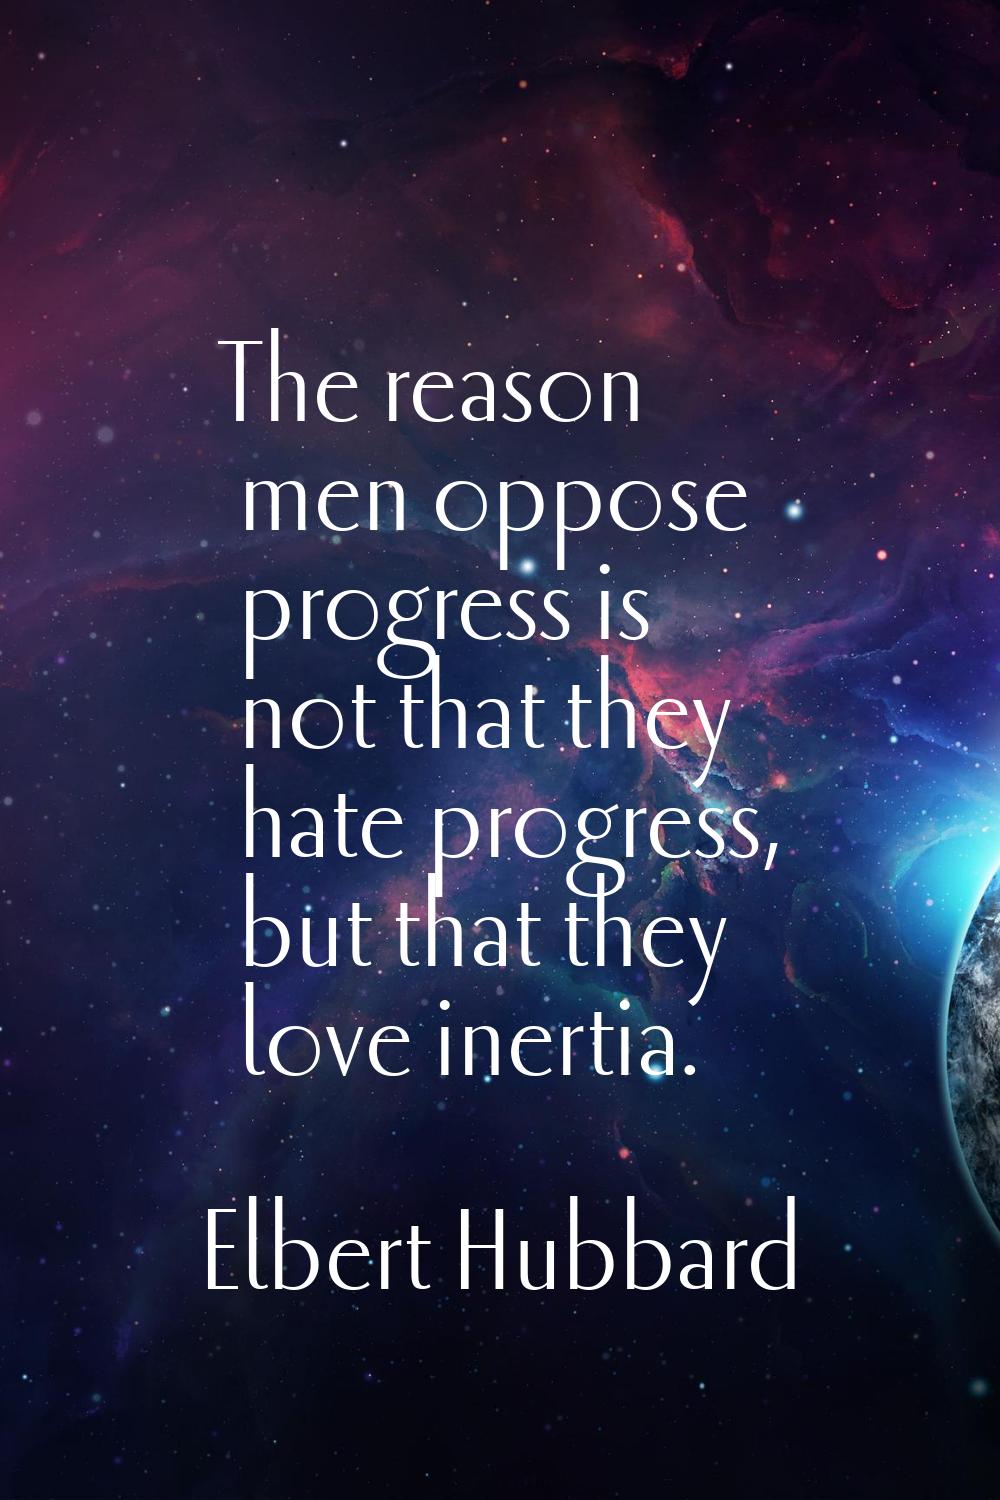 The reason men oppose progress is not that they hate progress, but that they love inertia.